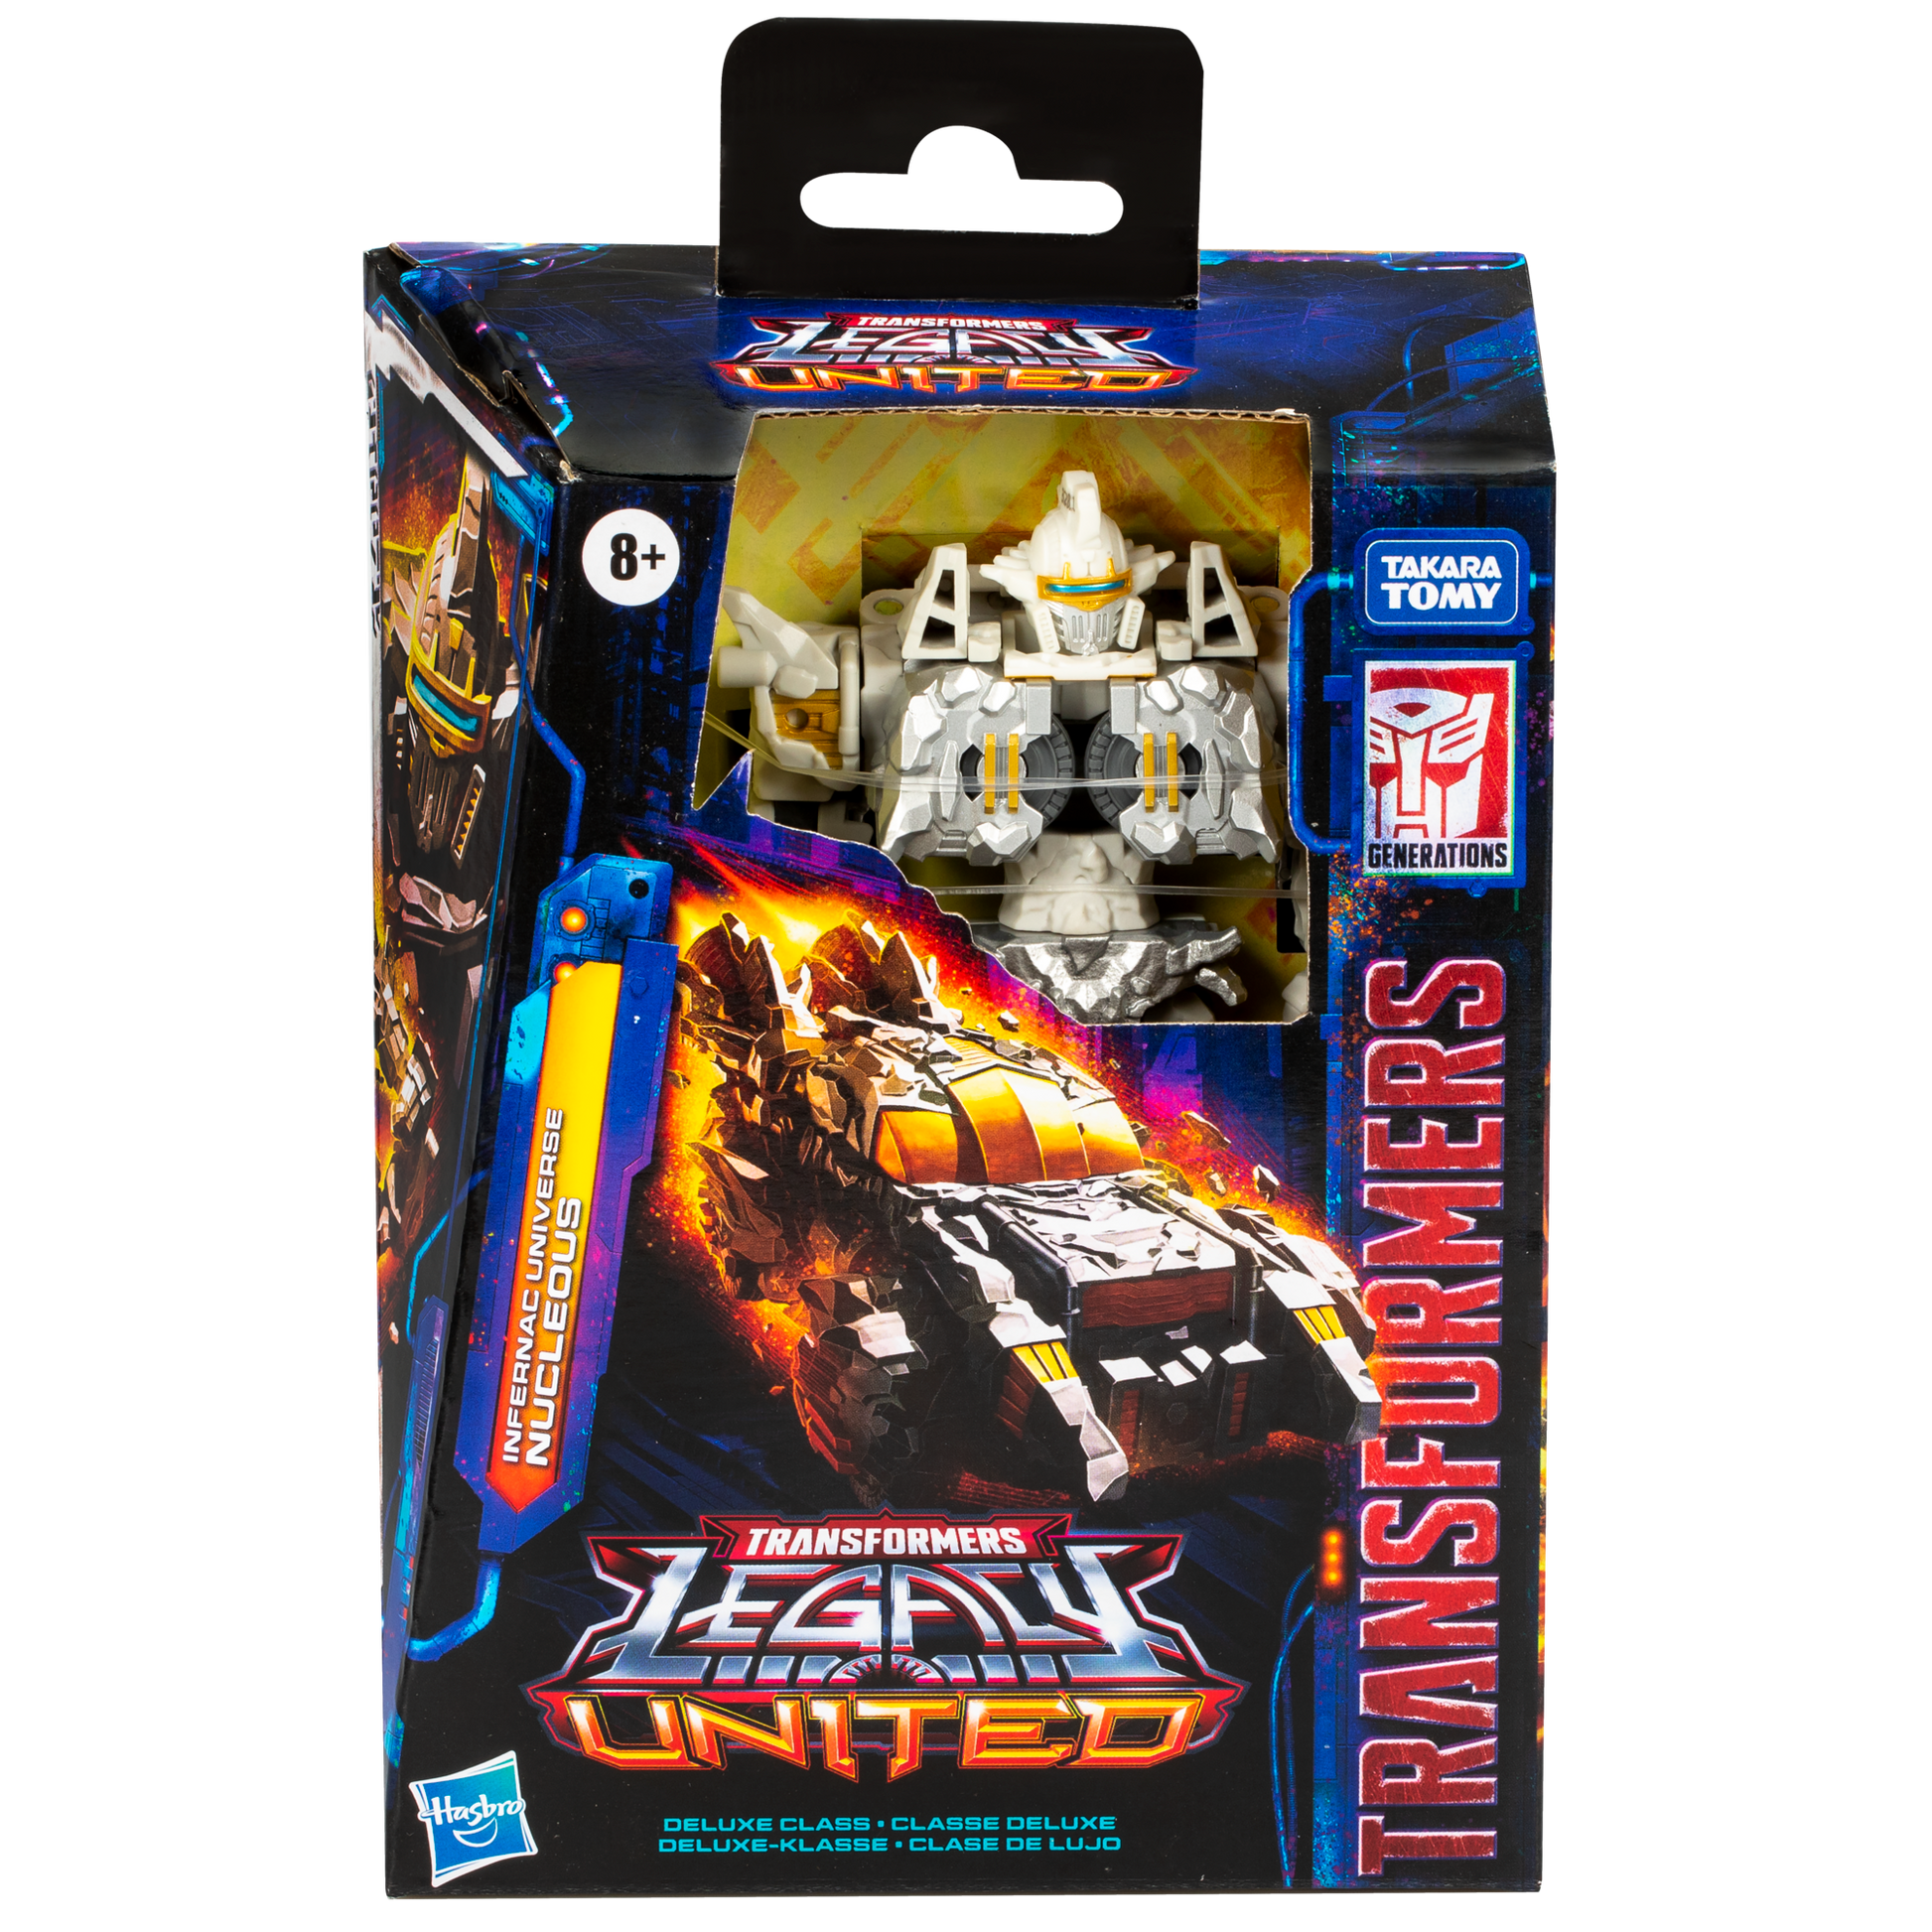 Transformers Legacy United Deluxe Class Infernac Universe Nucleous Action Figure